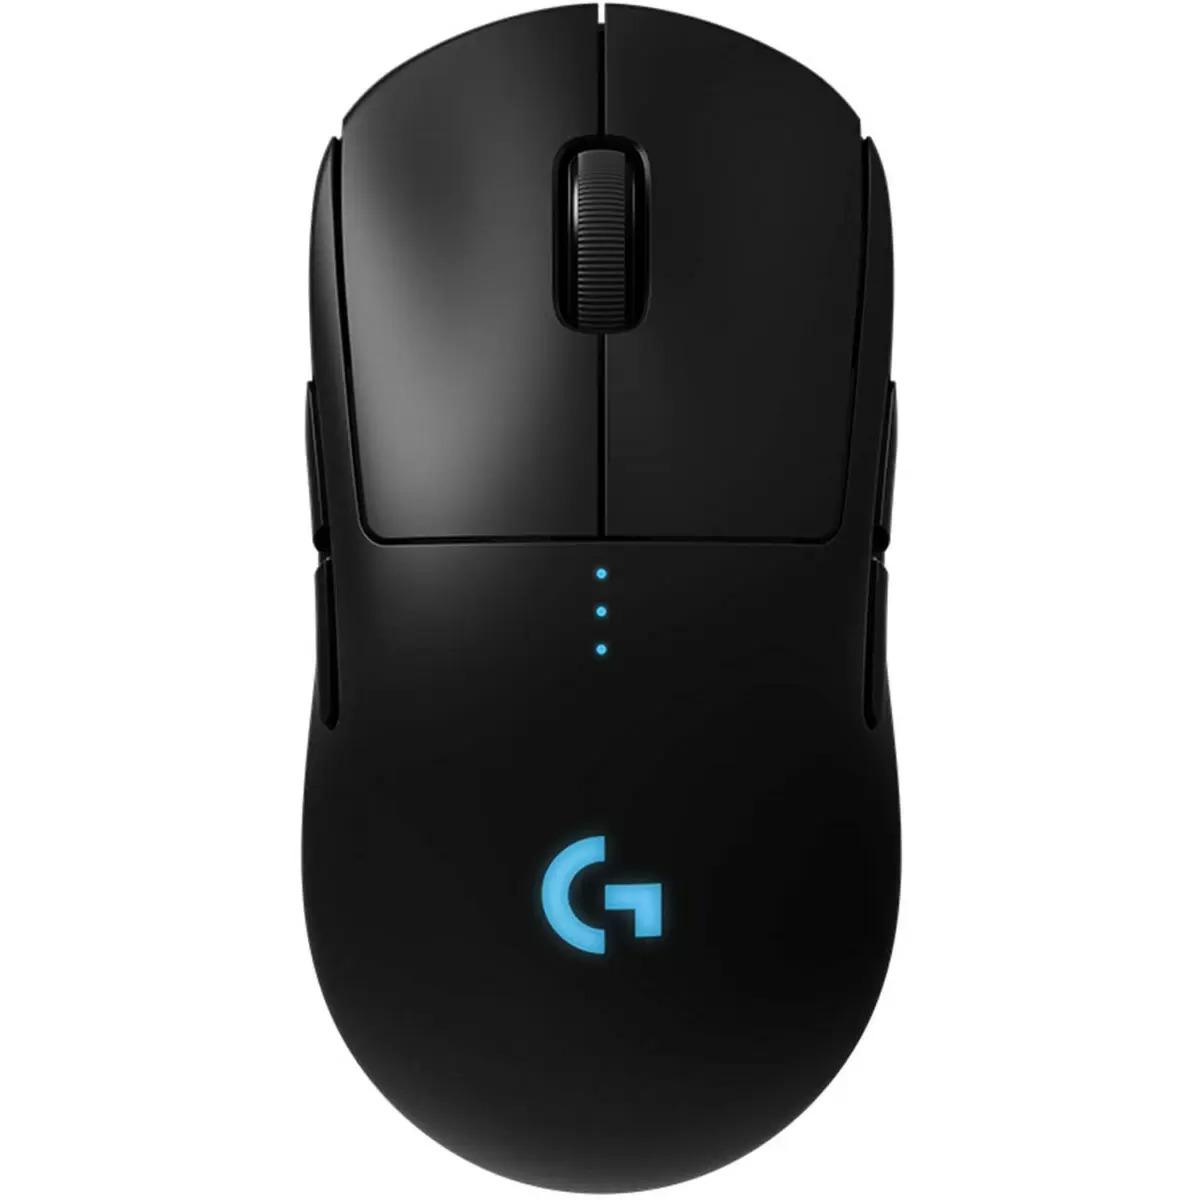 Logitech G Pro Wireless Gaming Mouse with Esports Performance for $79.69 Shipped